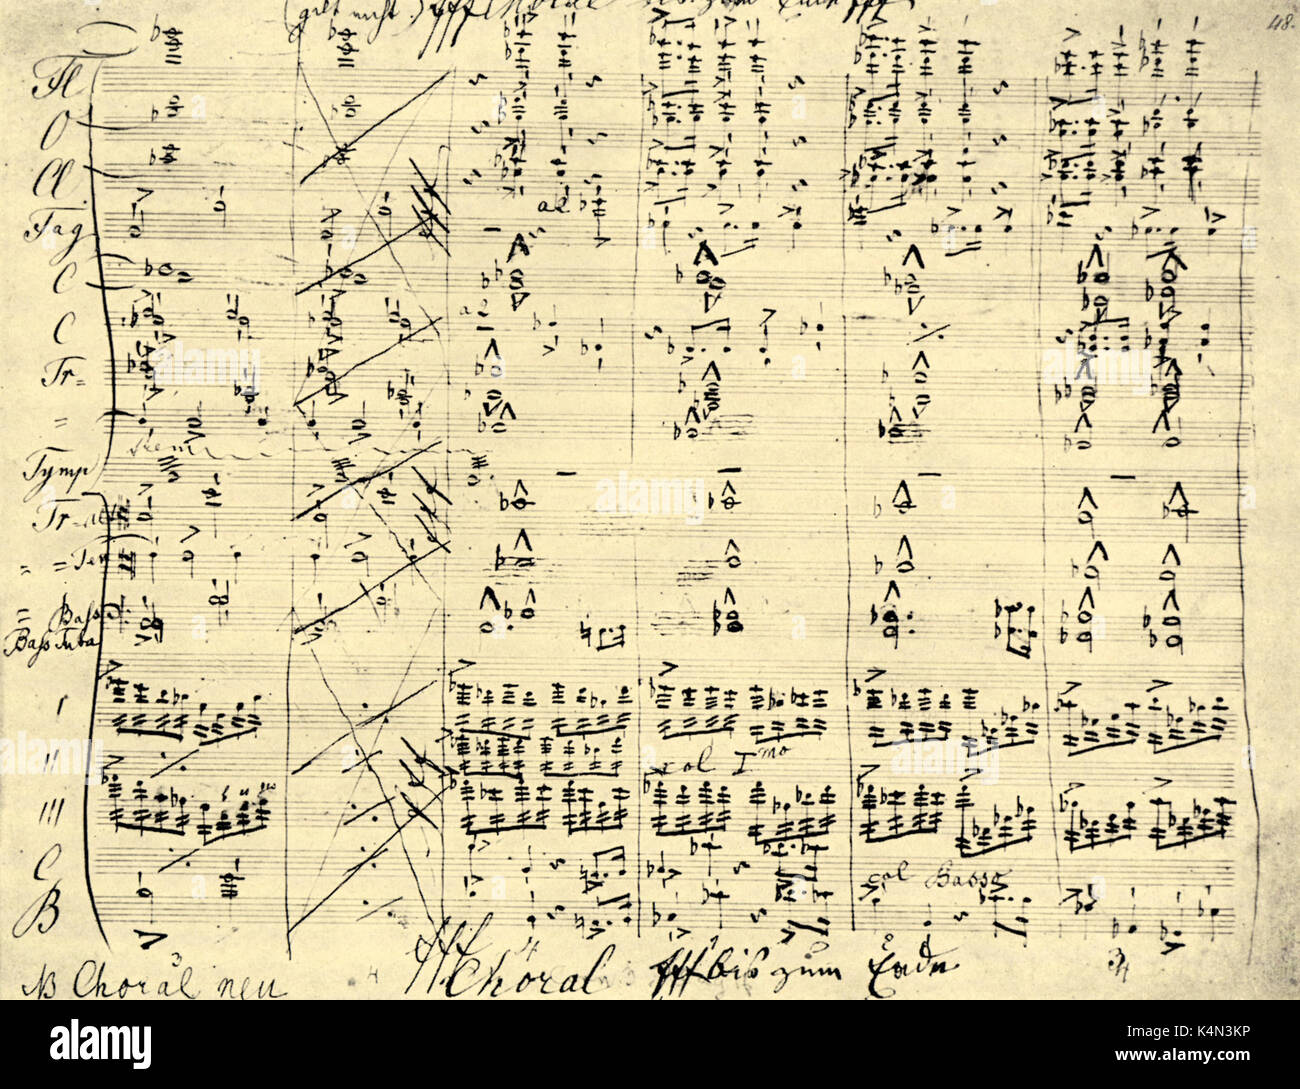 BRUCKNER, Anton - 5th SYMPHONY handwritten score showing the final choral entry.  Austrian composer & organist, 1824-1896 Stock Photo